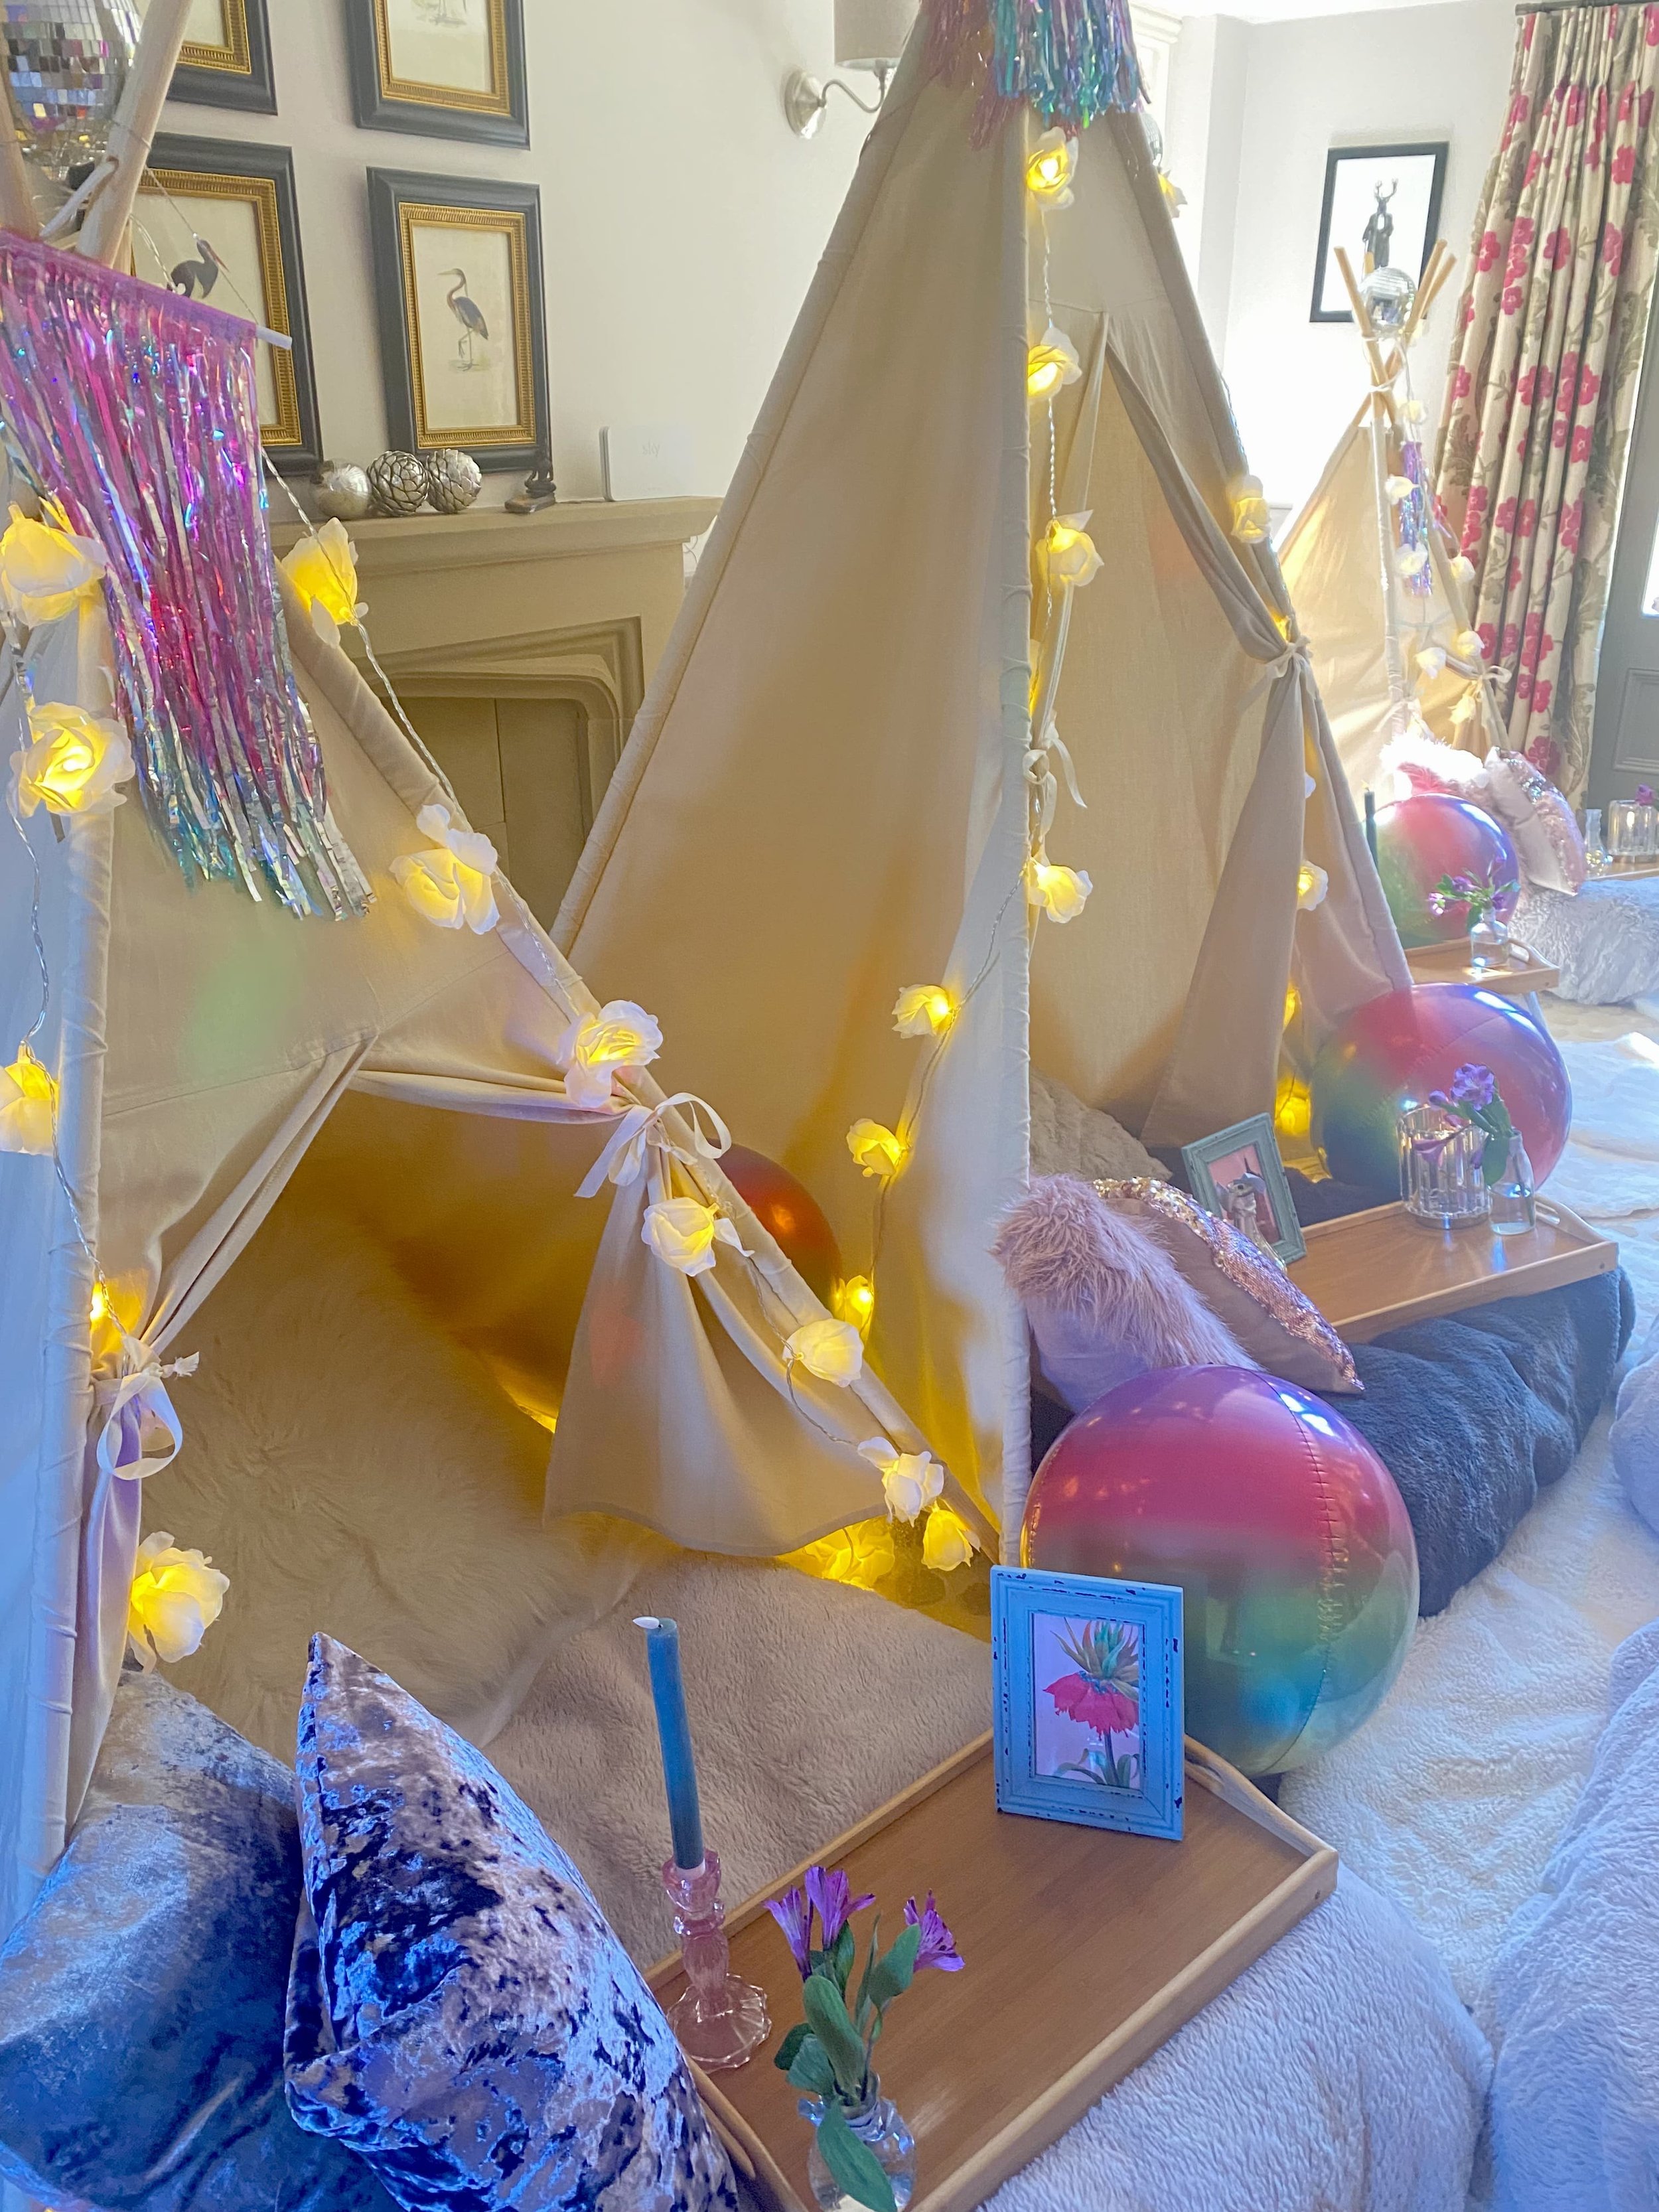 Canvas Belles Sleepover Parties- Sleepover Party Tents in Leicestershire